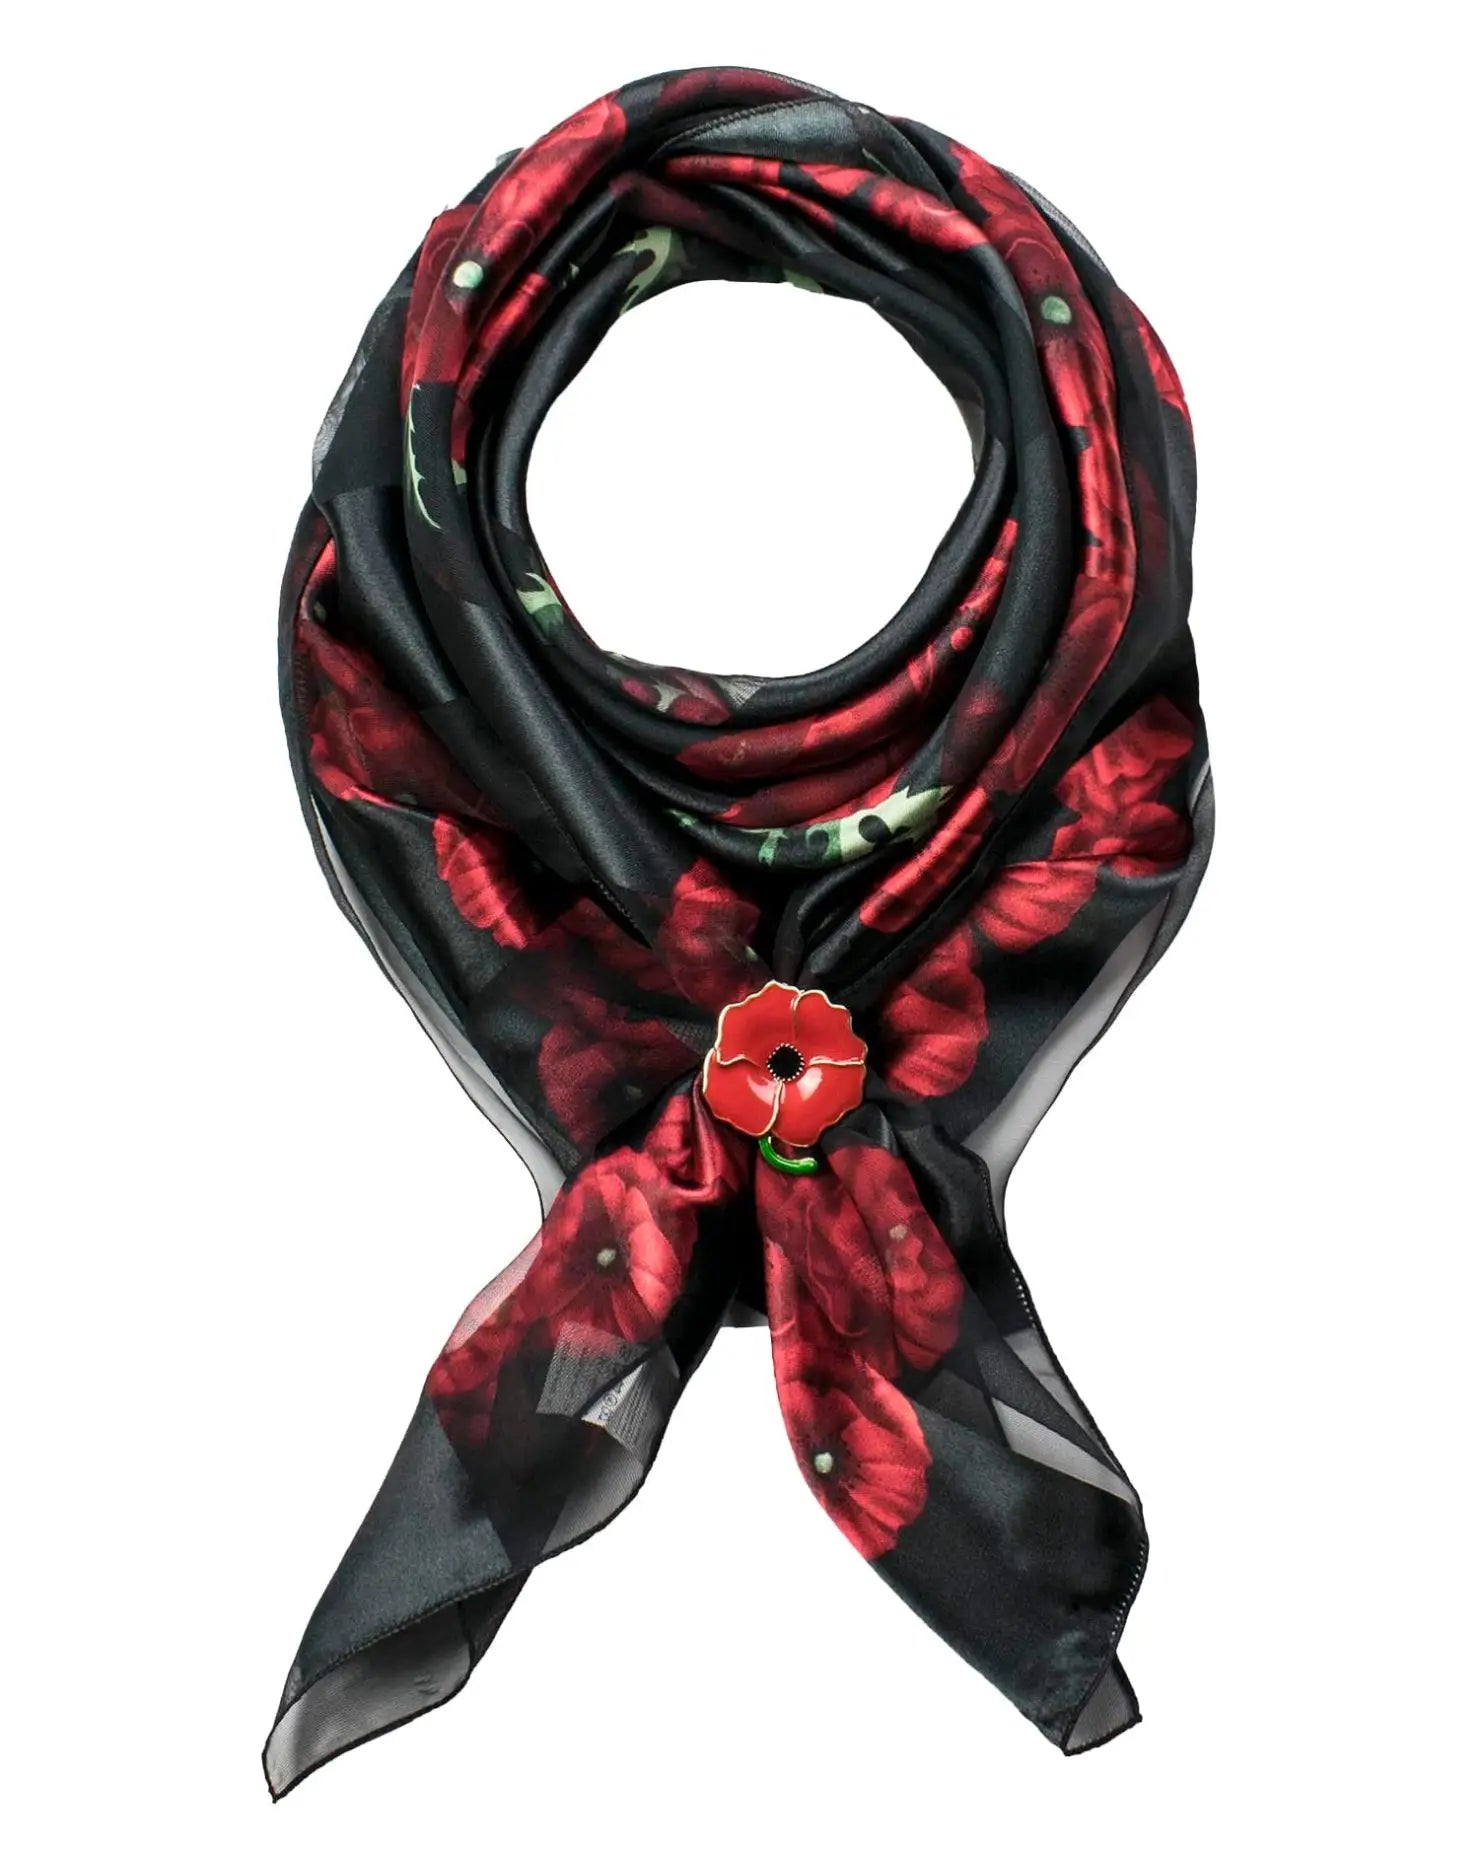 Large Square Poppy Scarf with Flower Design